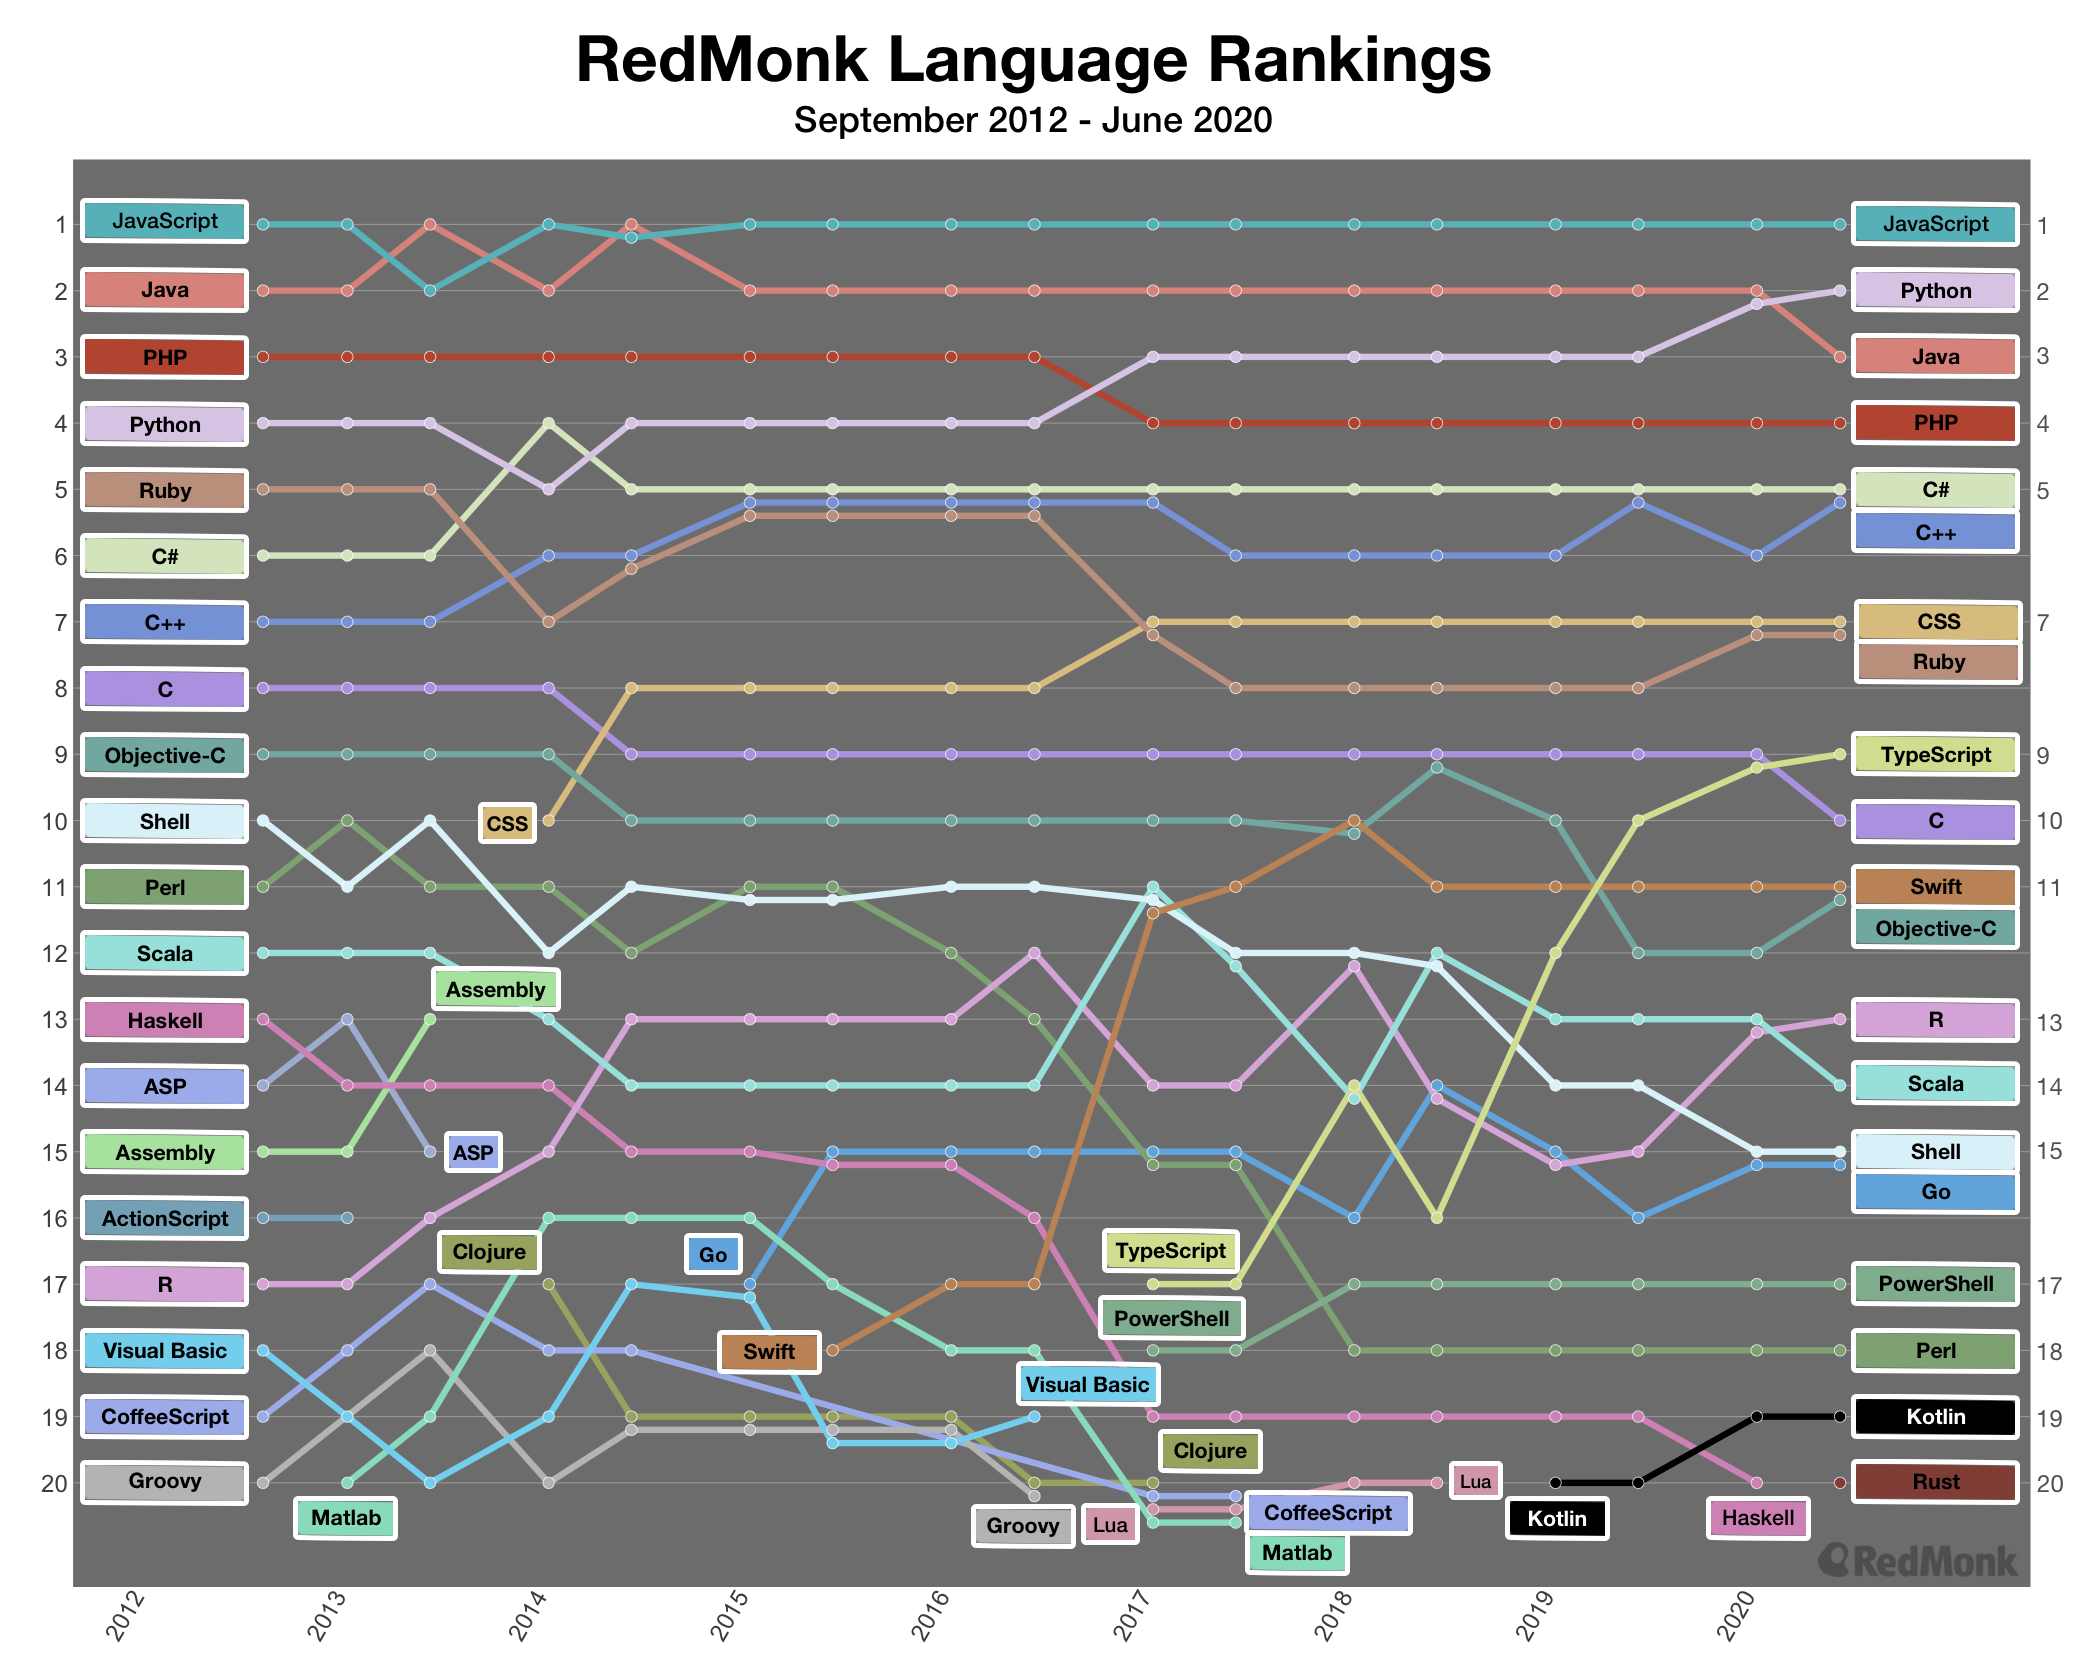 Top 20 languages over time. X-axis shows time ranging from 2012 to 2020. y-axis shows ranks 1-20. languages are plotted by rank for each iteration of the rankings, tracked over time.